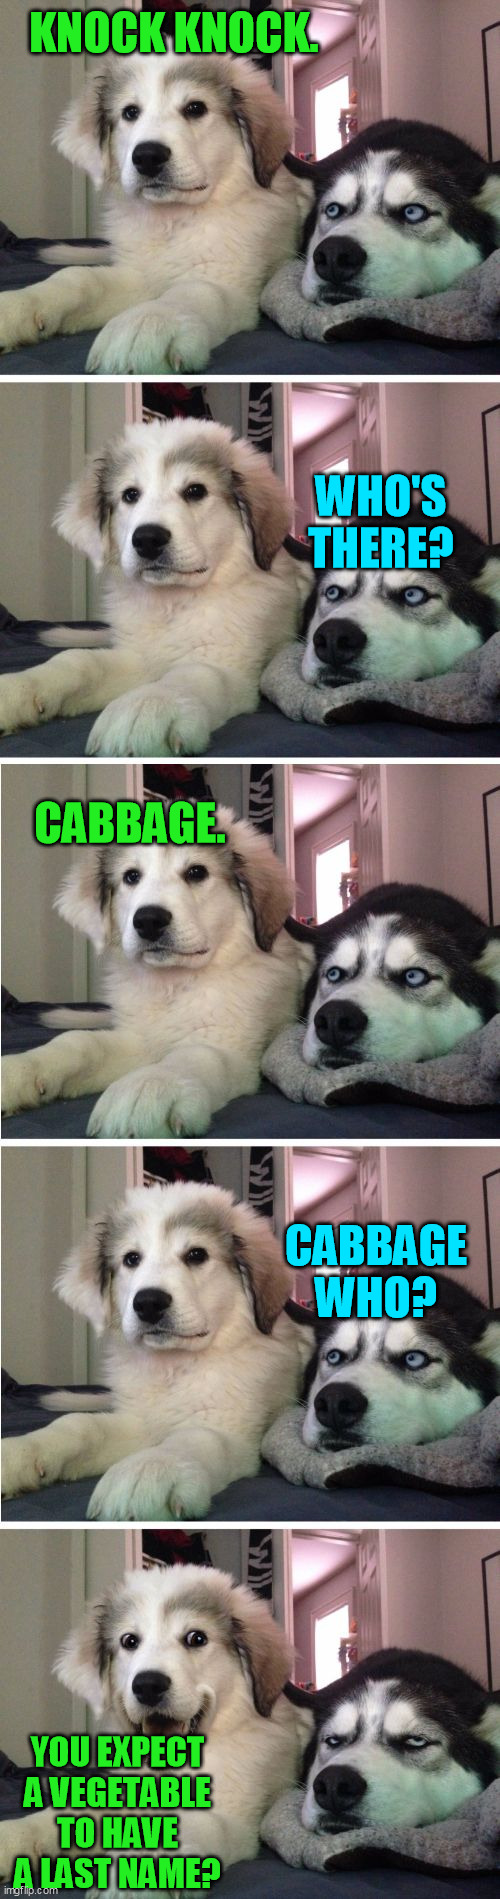 Knock Knock Dogs | KNOCK KNOCK. WHO'S THERE? CABBAGE. CABBAGE WHO? YOU EXPECT A VEGETABLE TO HAVE A LAST NAME? | image tagged in knock knock dogs | made w/ Imgflip meme maker